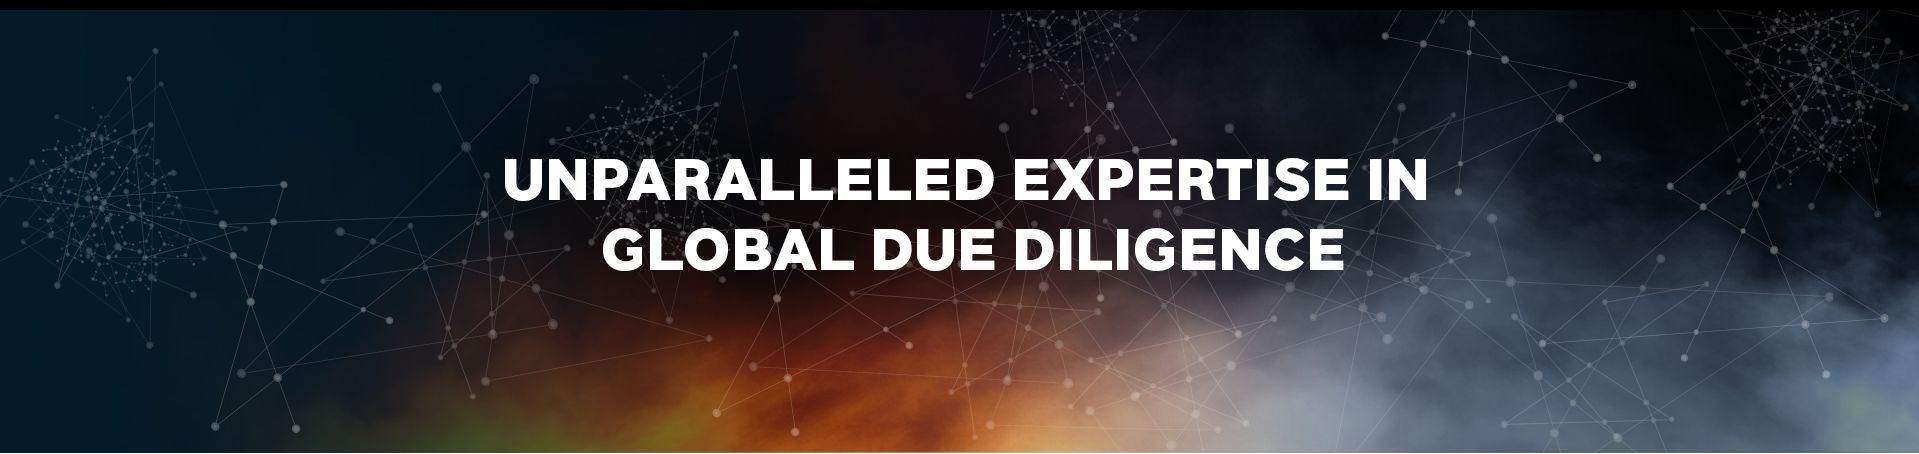   Unparalleled Expertise in Global Due Diligence